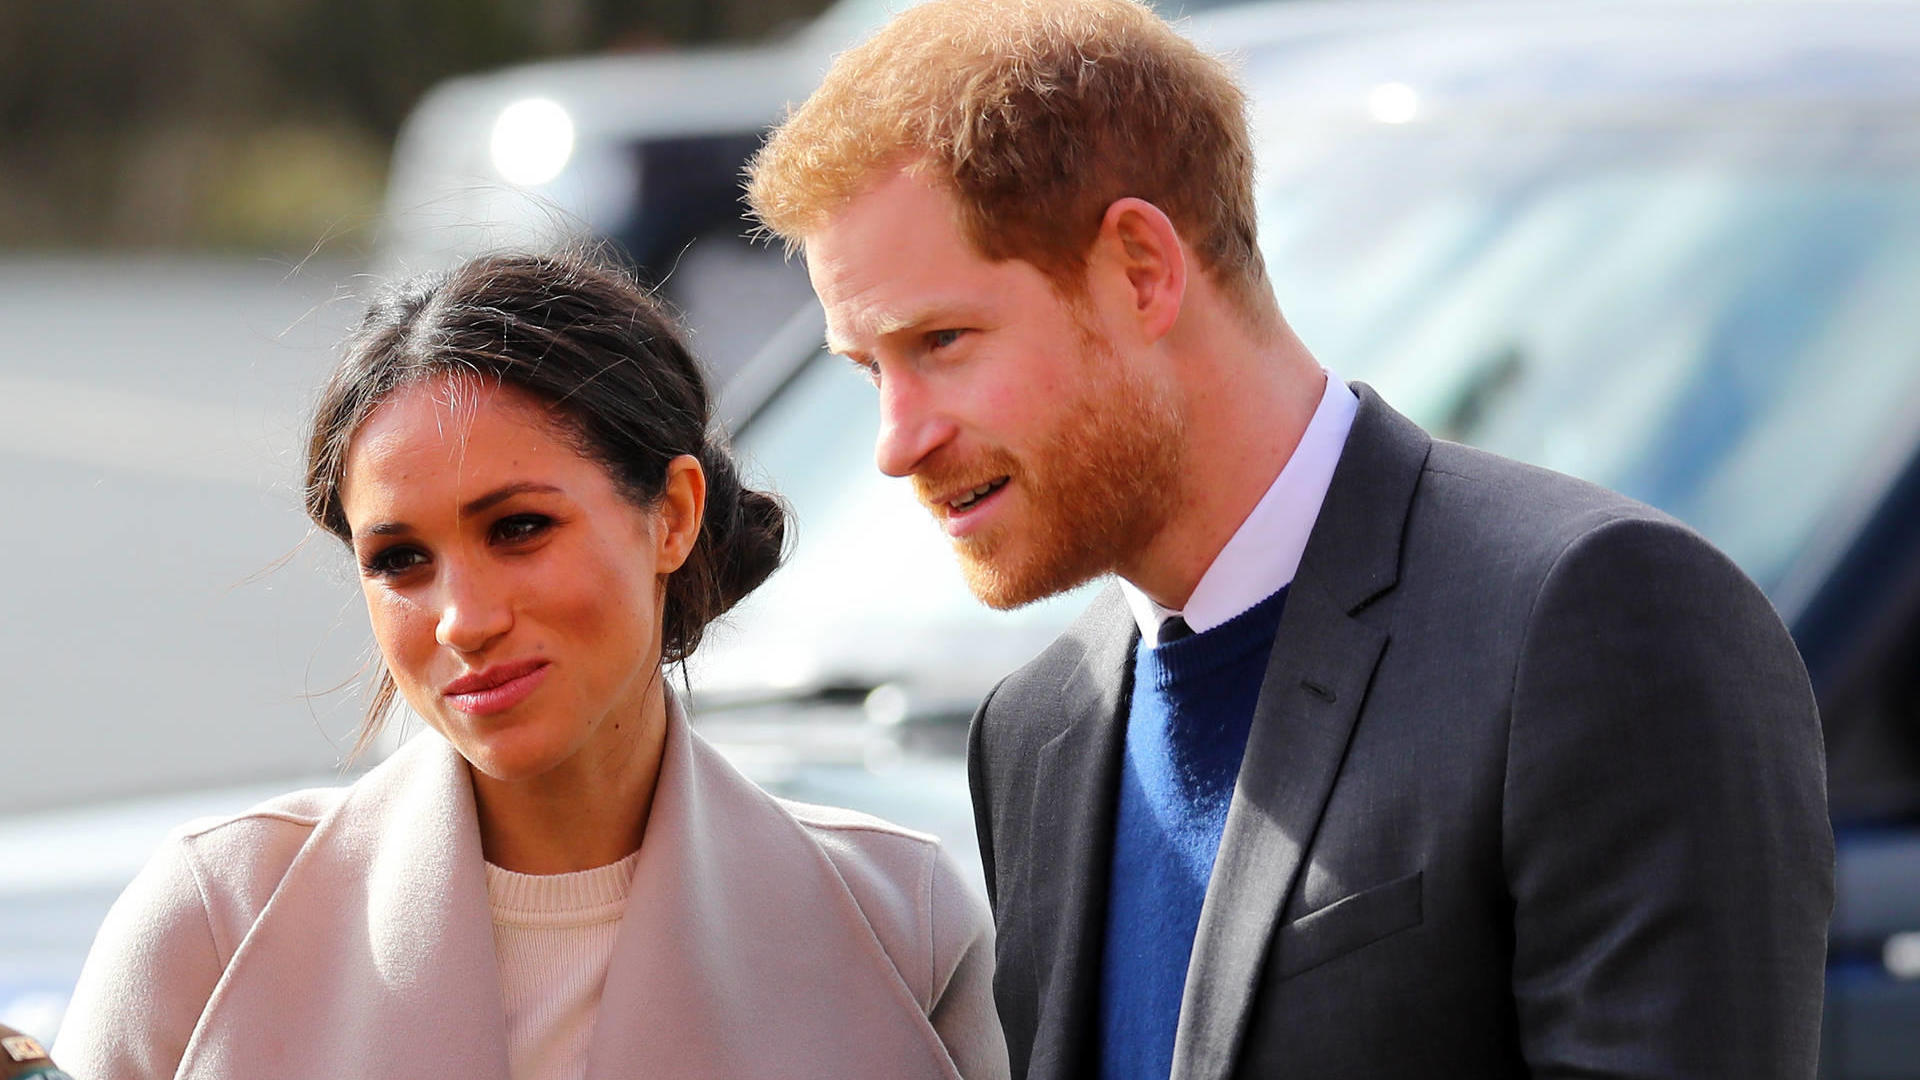 Prince Harry and Meghan Markle visit the Eikon Centre in Lisburn, where they attend an event to mark the second year of youth-led peace-building initiative Amazing the Space during their visit to Northern Ireland.Featuring: Prince Harry, Meghan Markl